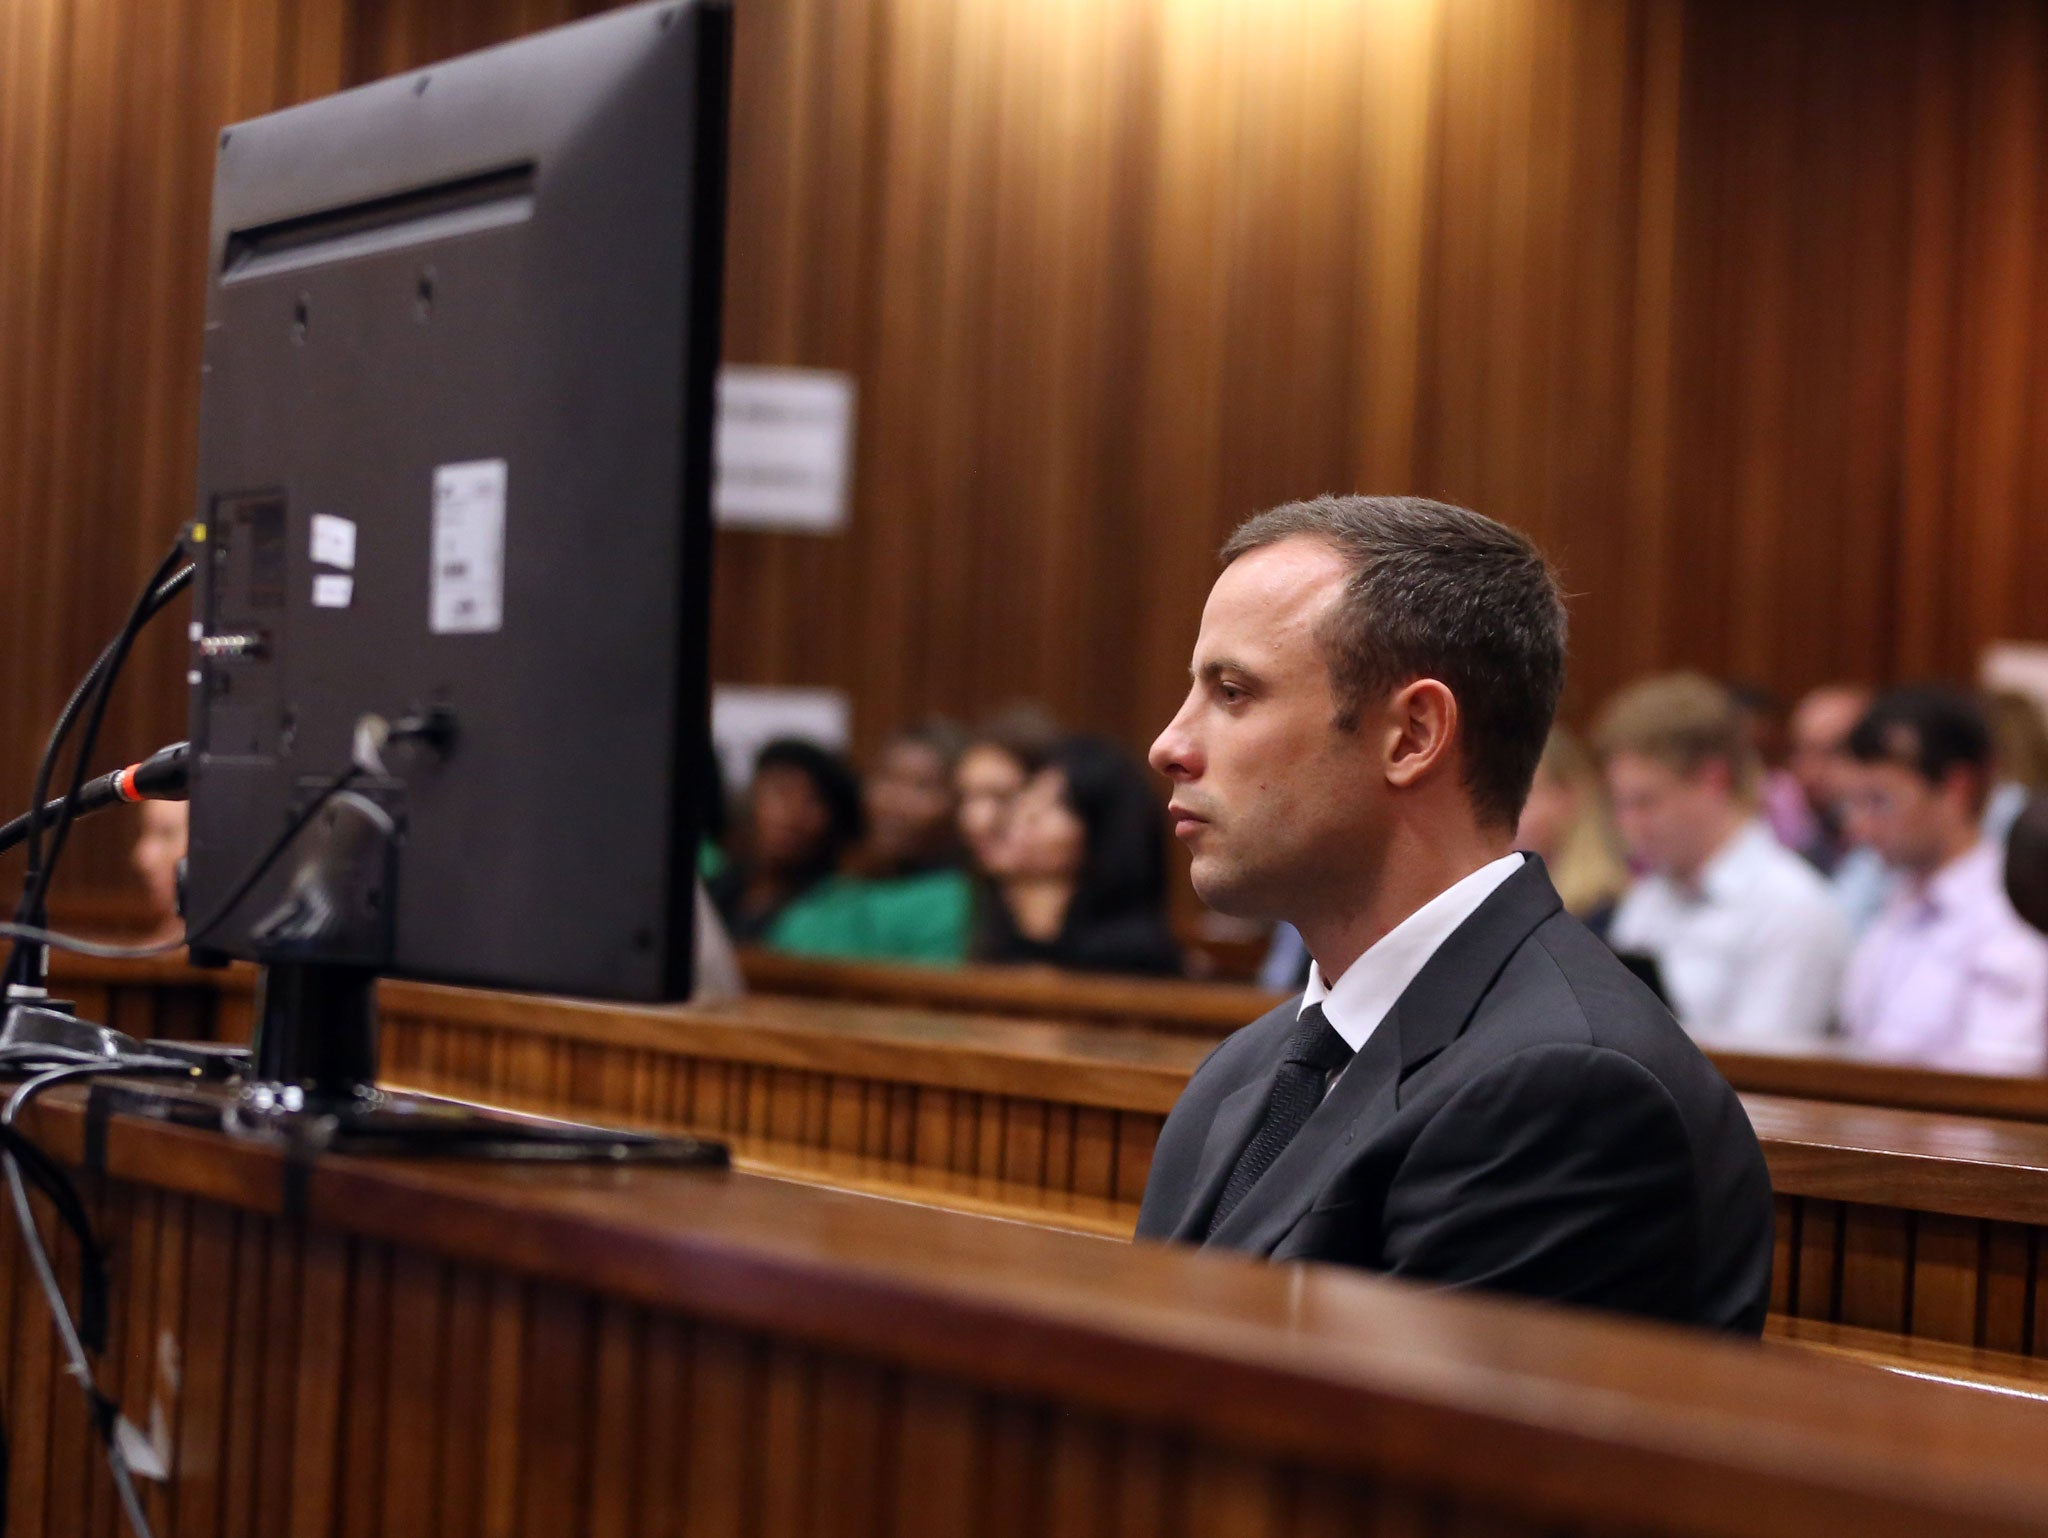 South African paralympic athlete Oscar Pistorius listens at the Pretoria's North Gauteng High Court on March 7, 2014, during the 5th day of his trial for the 2013 murder of his girlfriend Reeva Steenkamp